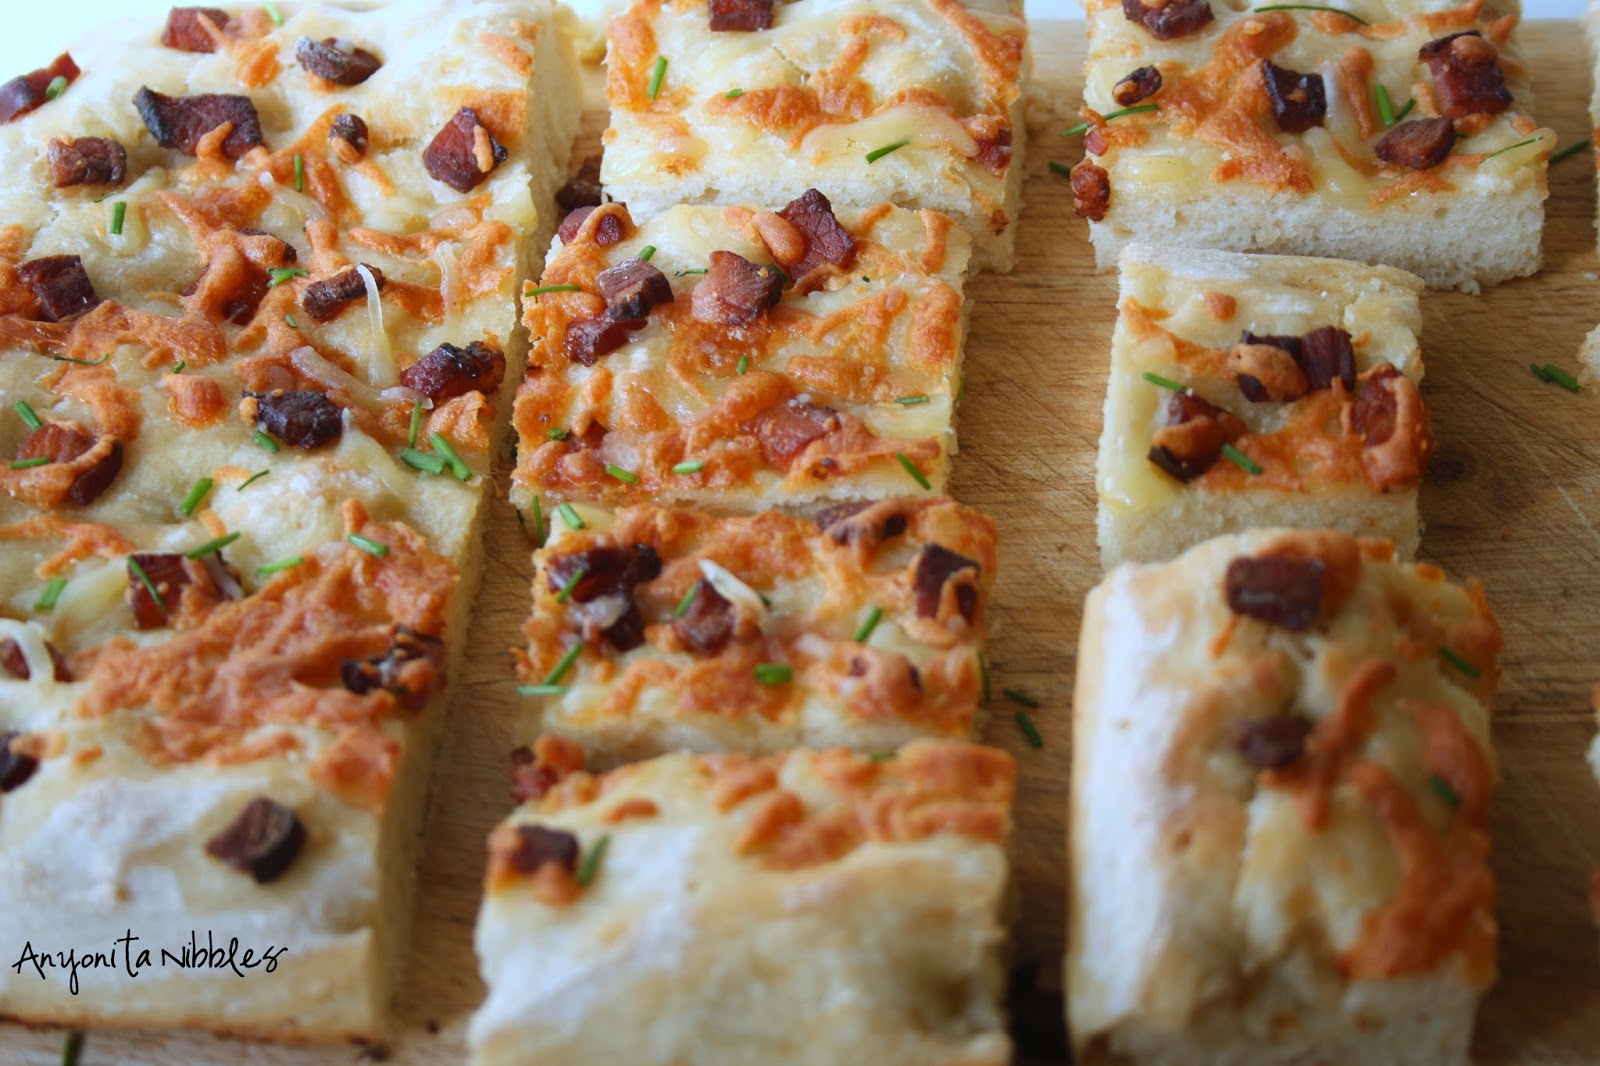 Cheese and bacon potato focaccia with chives from Anyonita Nibbles